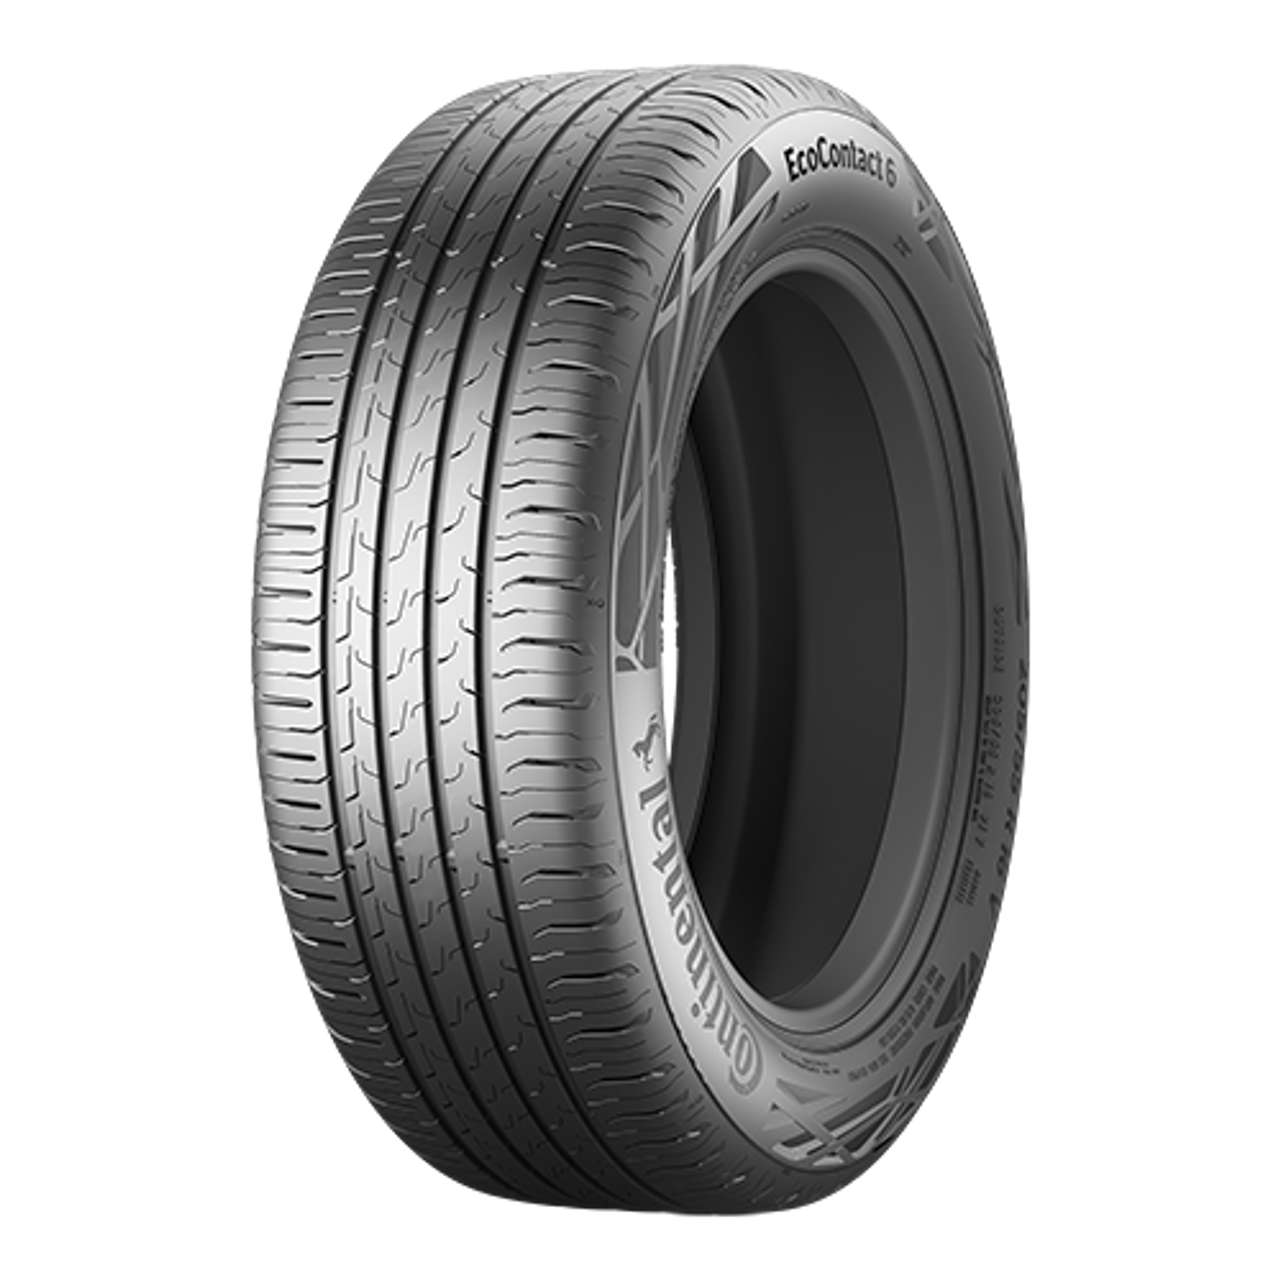 CONTINENTAL ECOCONTACT 6 (EVc) 195/65R15 95H BSW XL